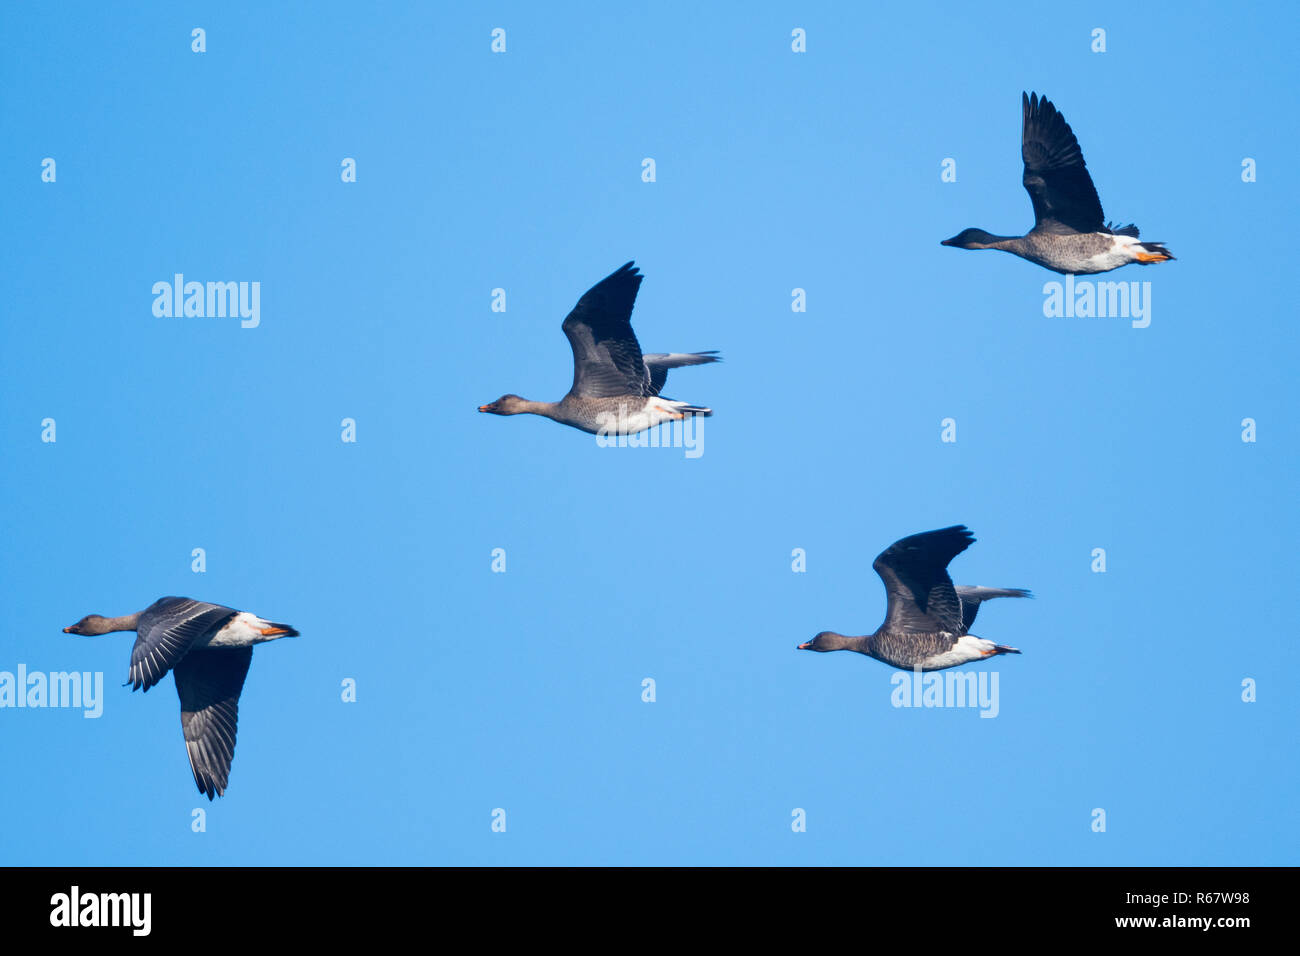 Bean Geese (Anser fabalis) flying, Emsland, Lower Saxony, Germany Stock Photo